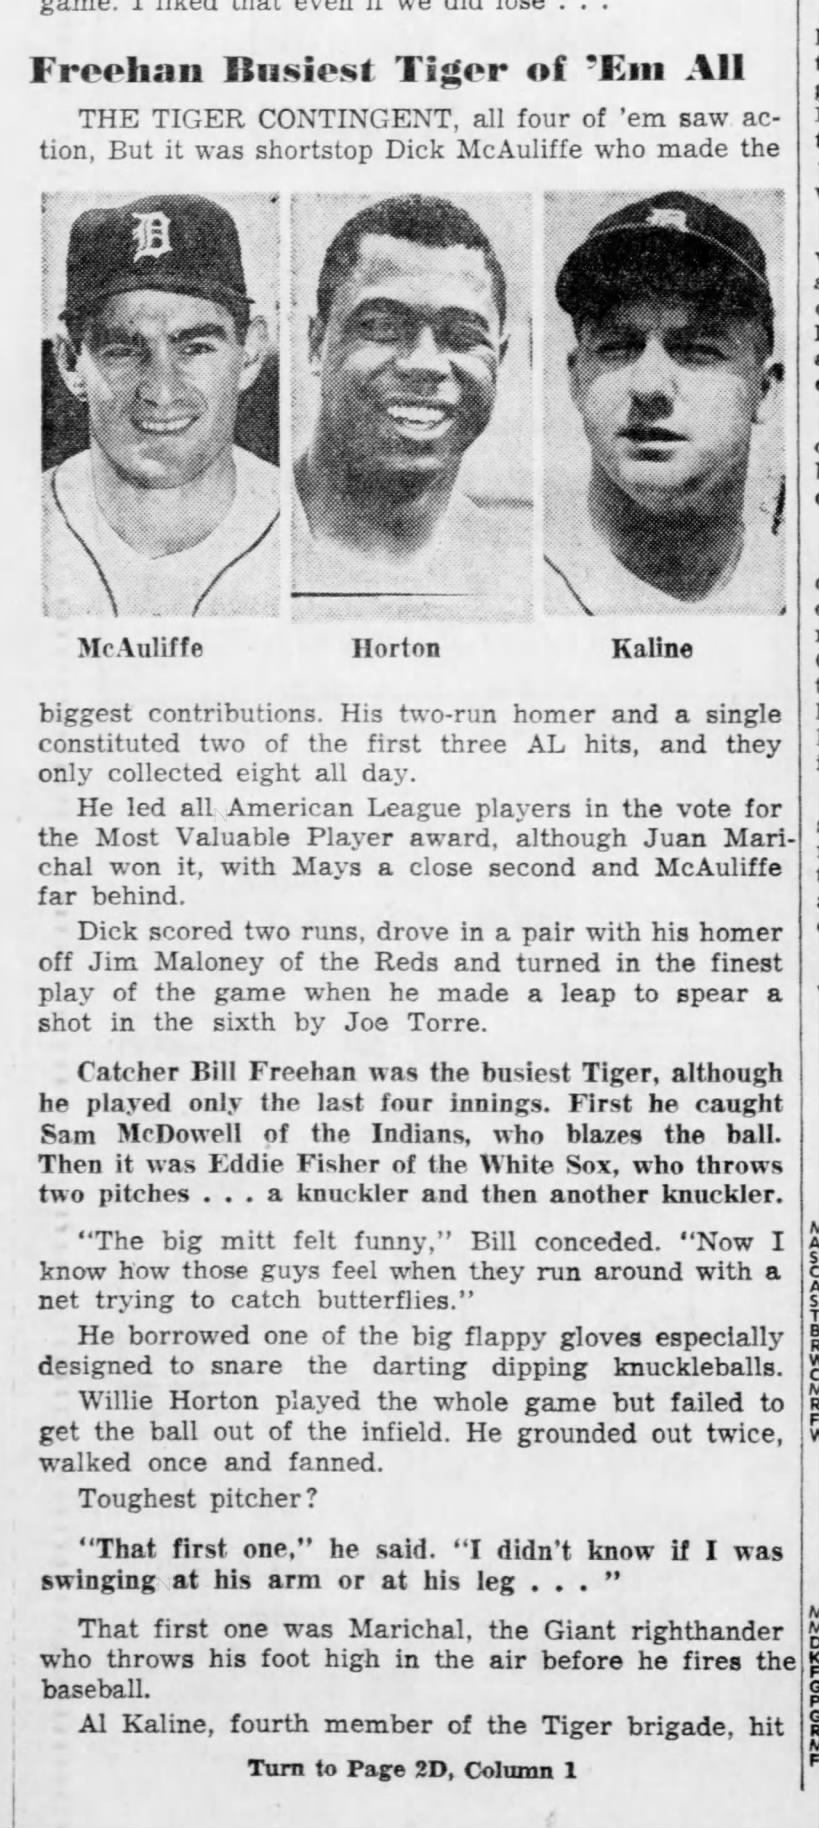 Wed 7/14/65: Tigers in the ASG